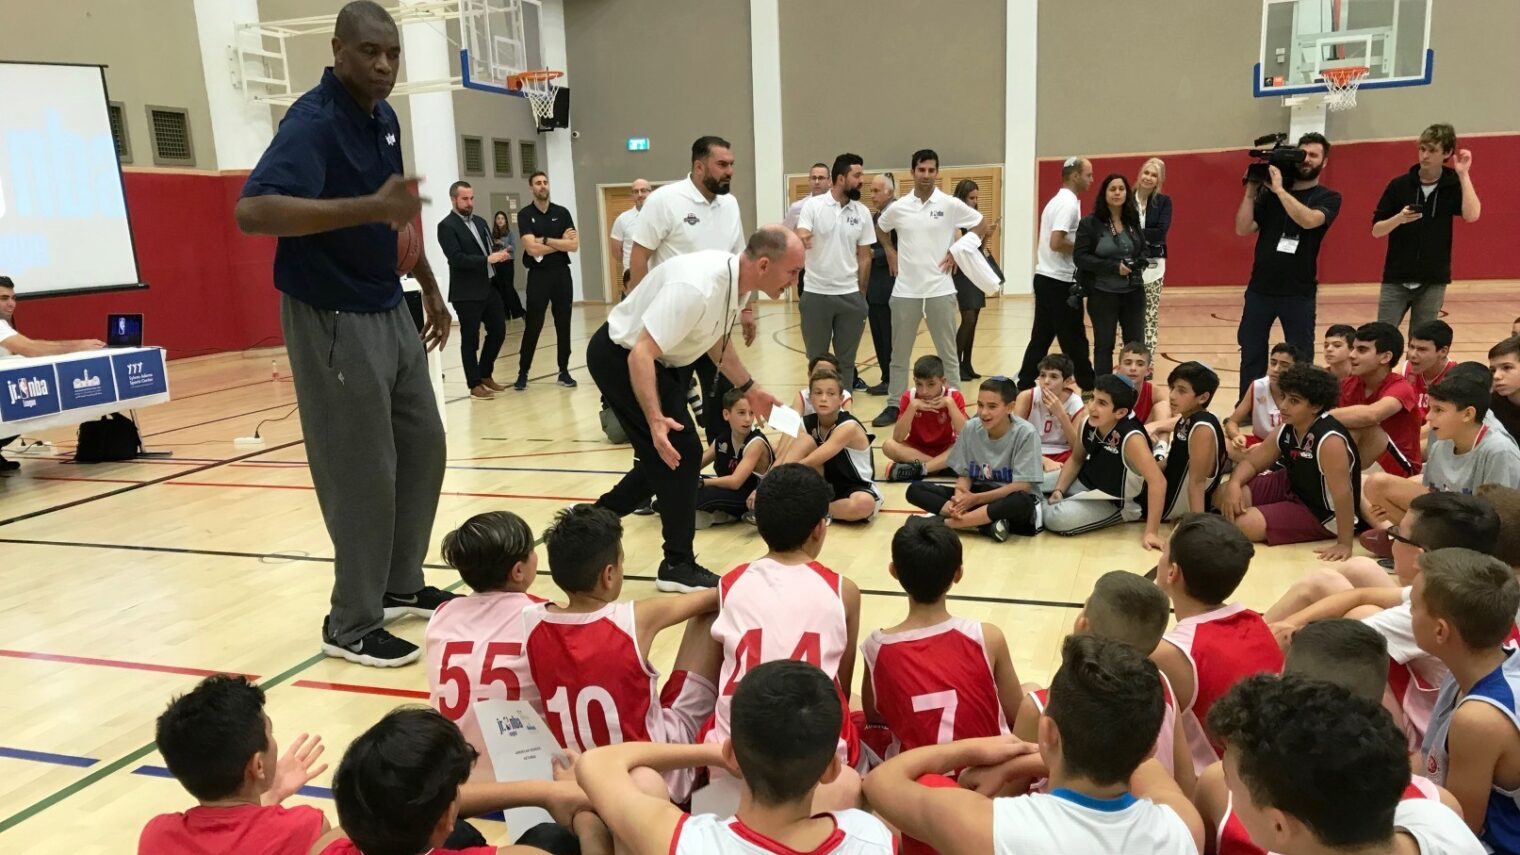 Basketball Hall of Famer Dikembe Mutombo and an NBA official greeting kids in the new Jr. NBA Jerusalem International YMCA League. Photo by Abigail Klein Leichman